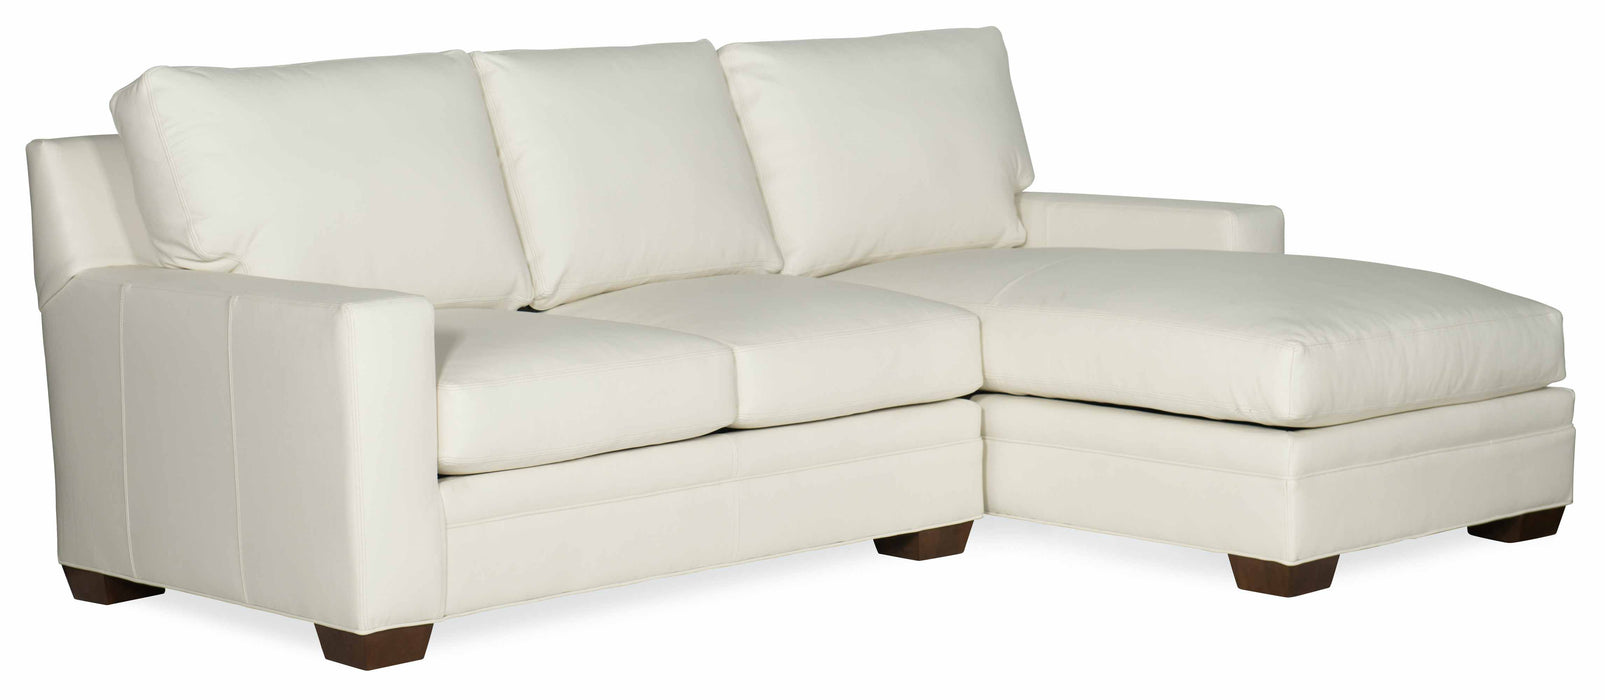 Hanley Leather Sofa With Chaise